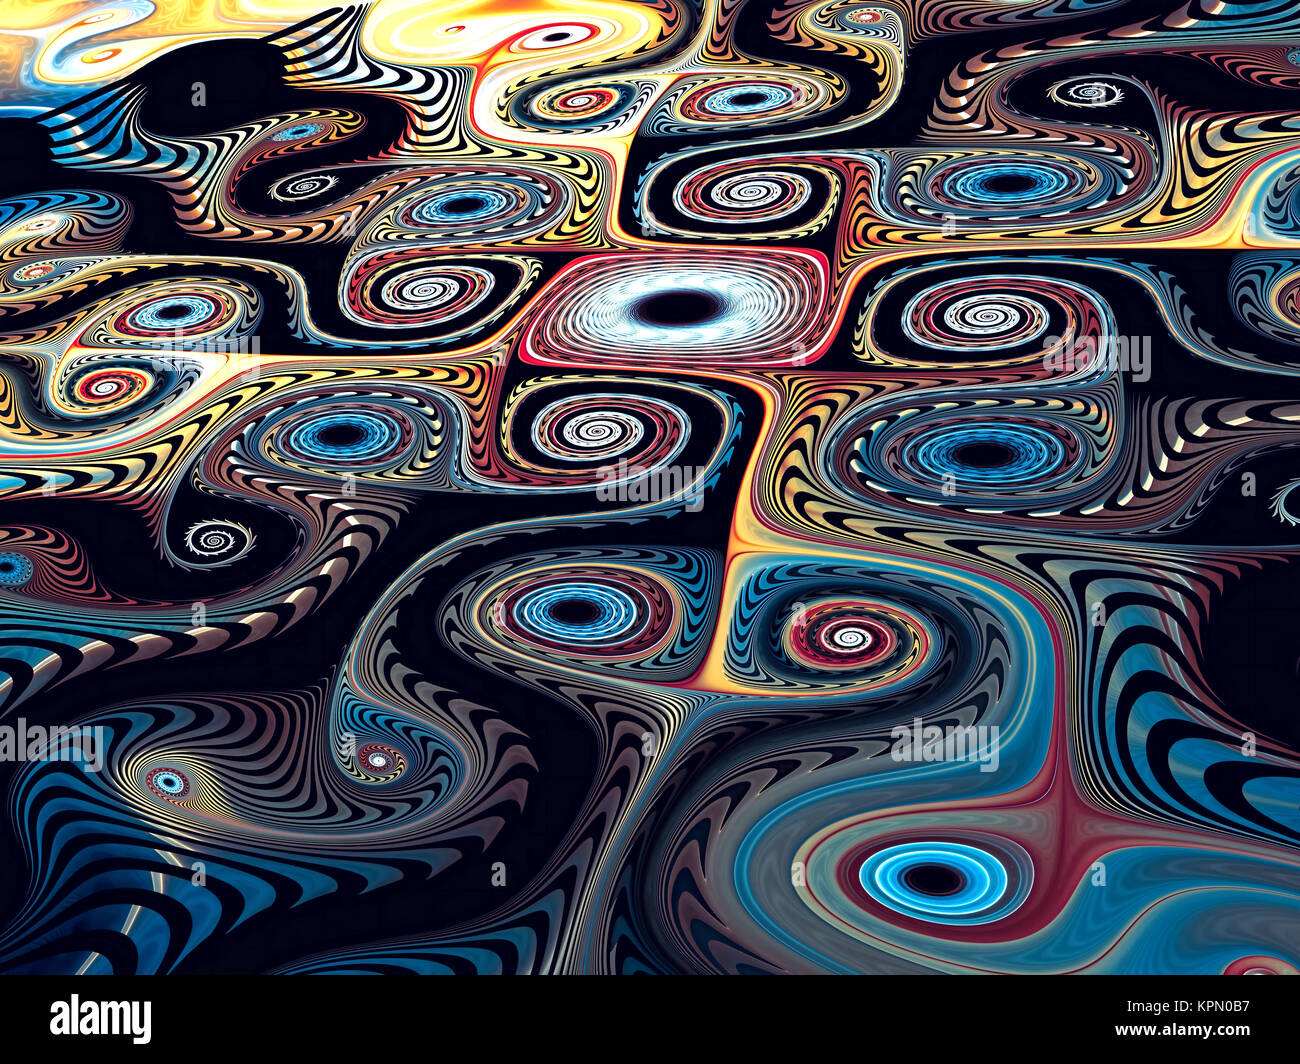 Abstract ornament background digitally generated image Stock Photo